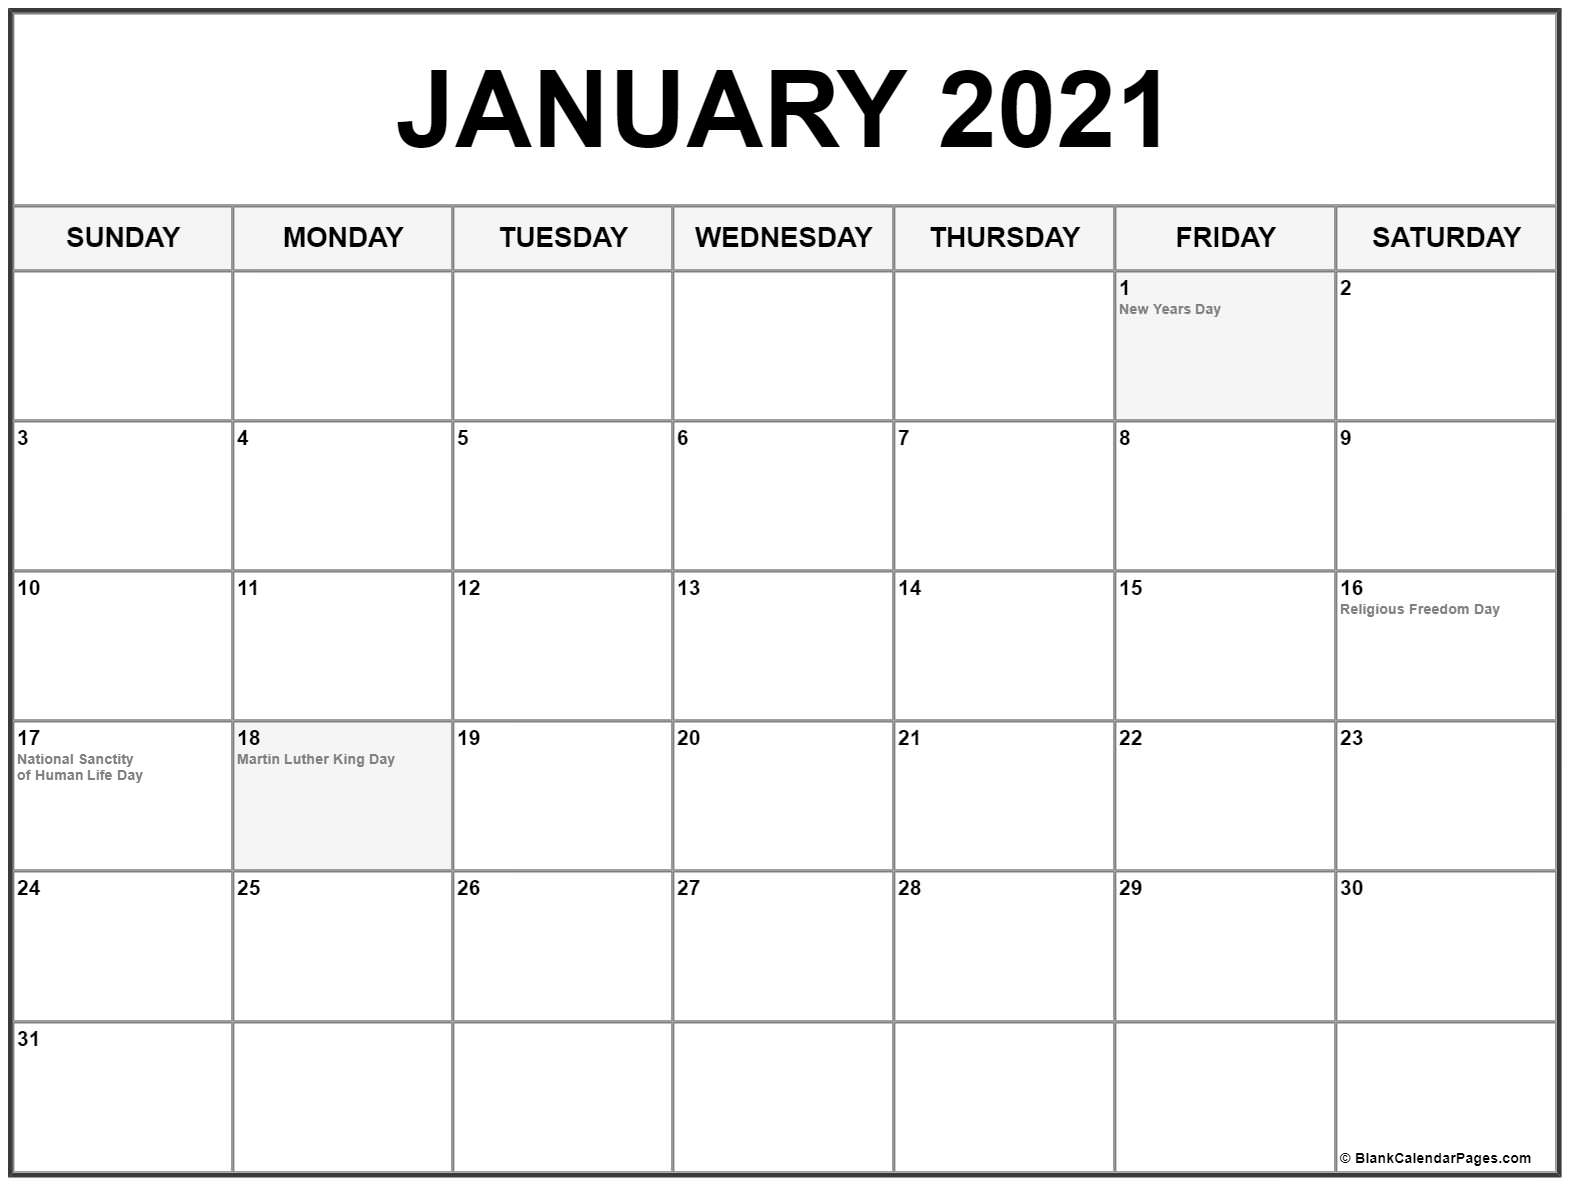 Collection Of January 2021 Calendars With Holidays | Qualads